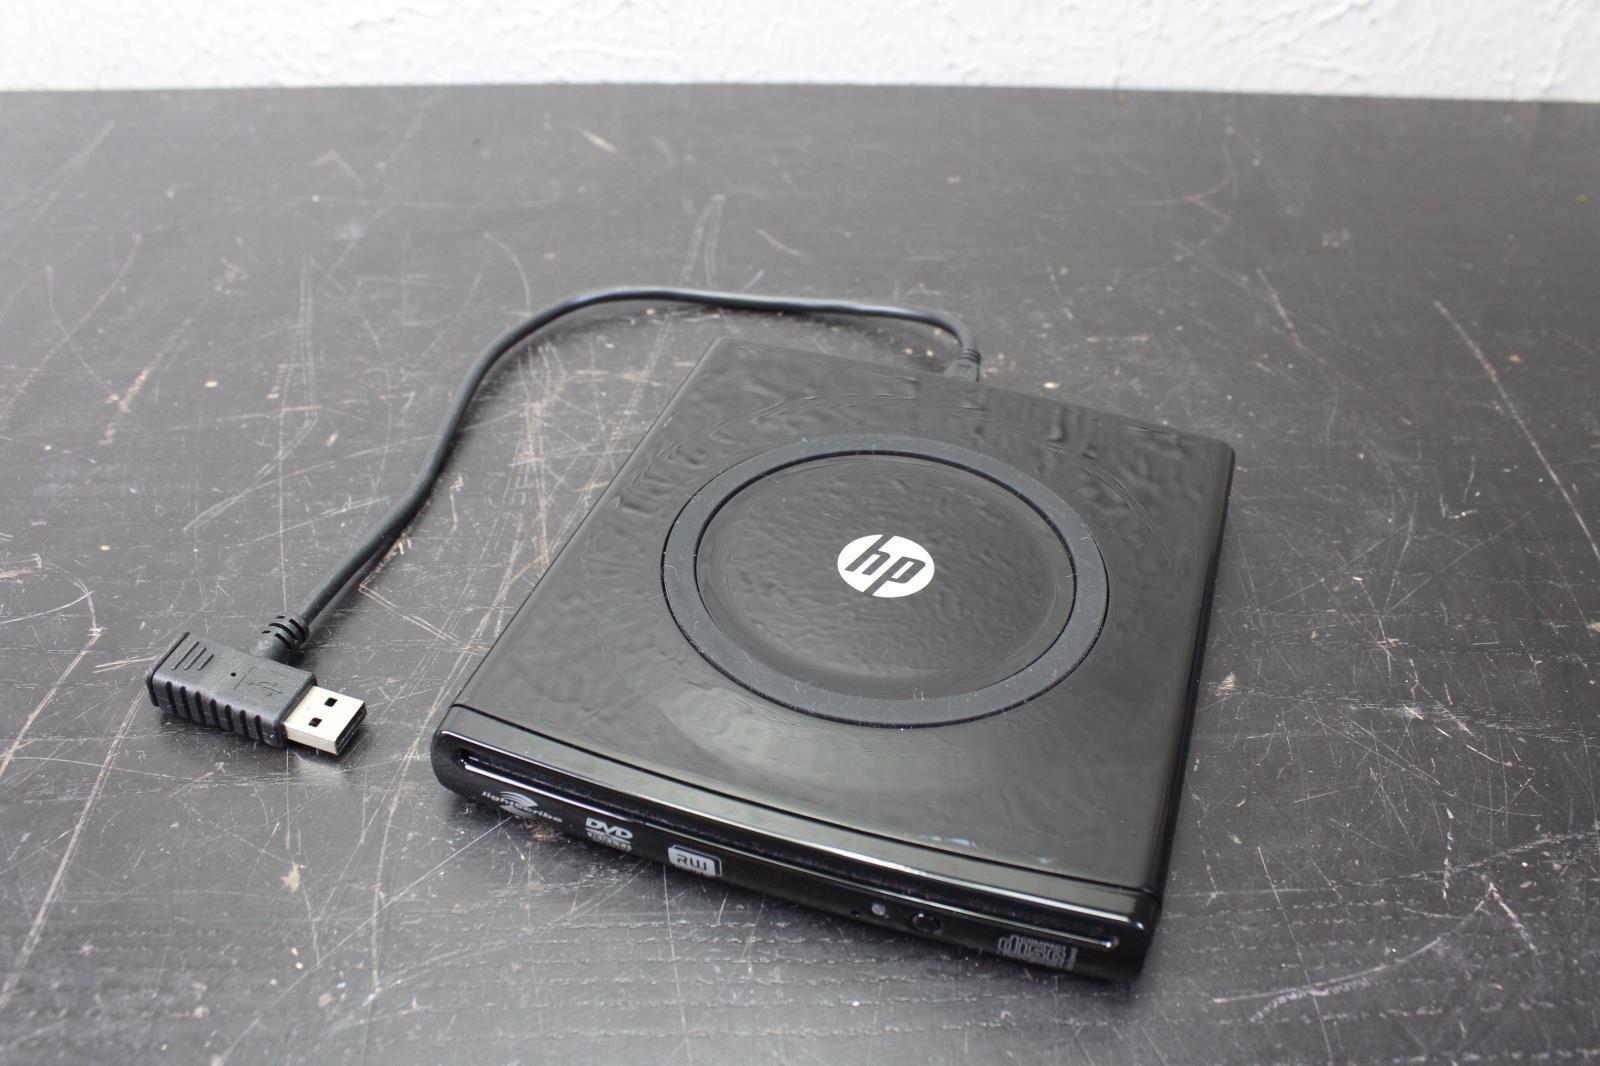 HP dvd565s Lightscribe 8X External Slot-load Slim Multiformat DVD With USB Cable